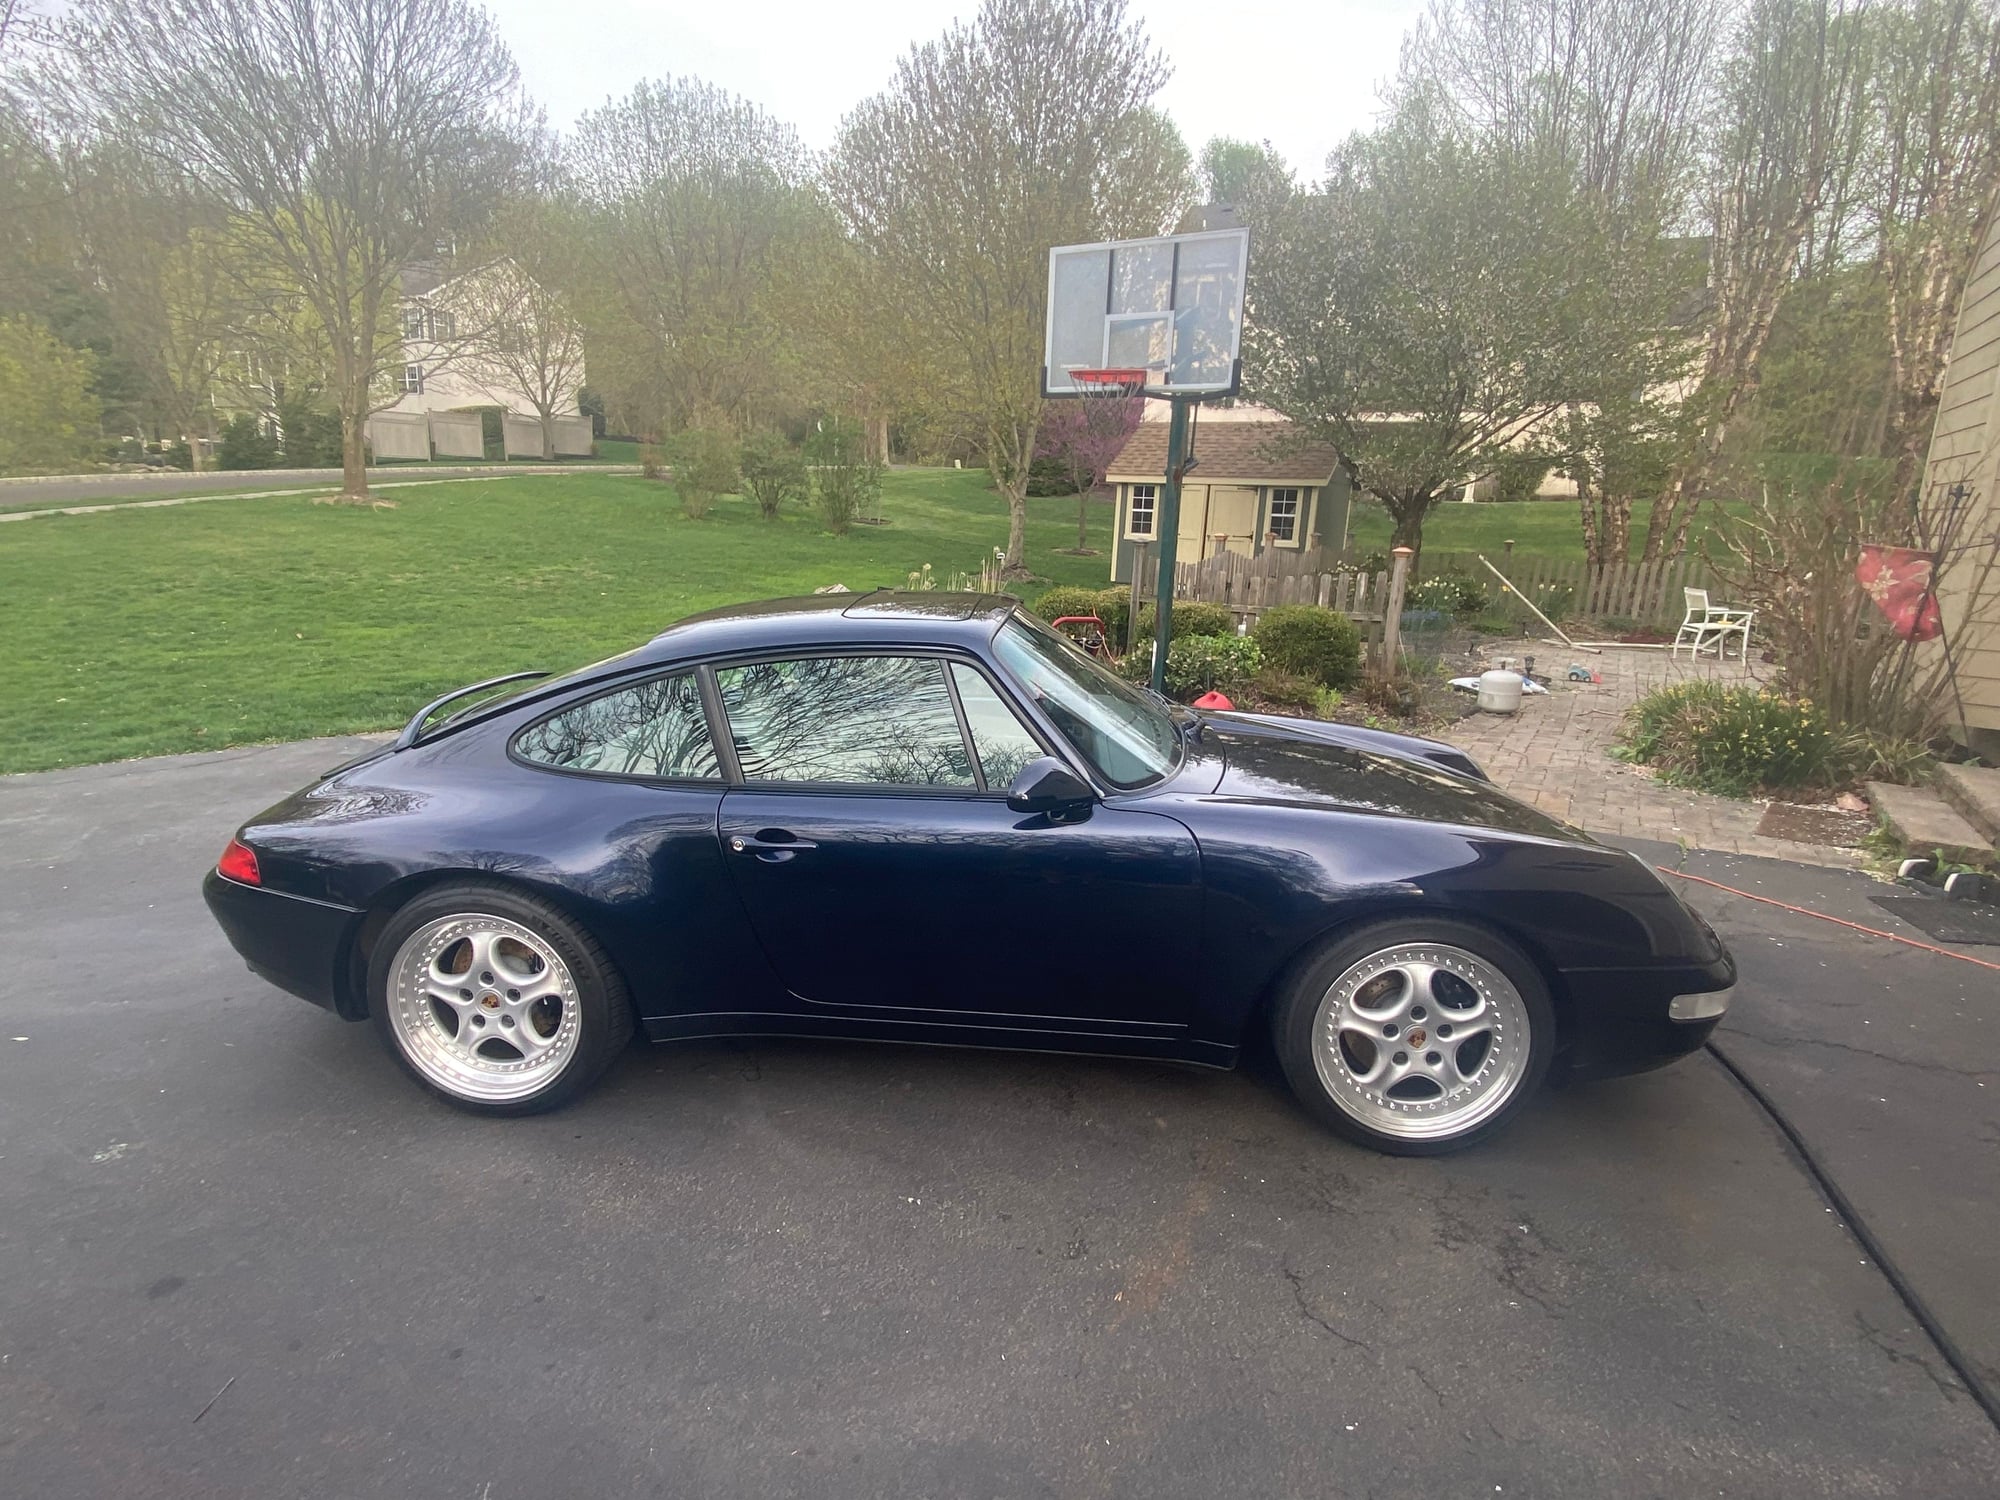 1995 Porsche 911 - 1995 993 6 speed 42k miles - Used - VIN Wpoaa2994ss322646 - 42,000 Miles - 6 cyl - 2WD - Manual - Coupe - Blue - Doylestown, PA 18902, United States